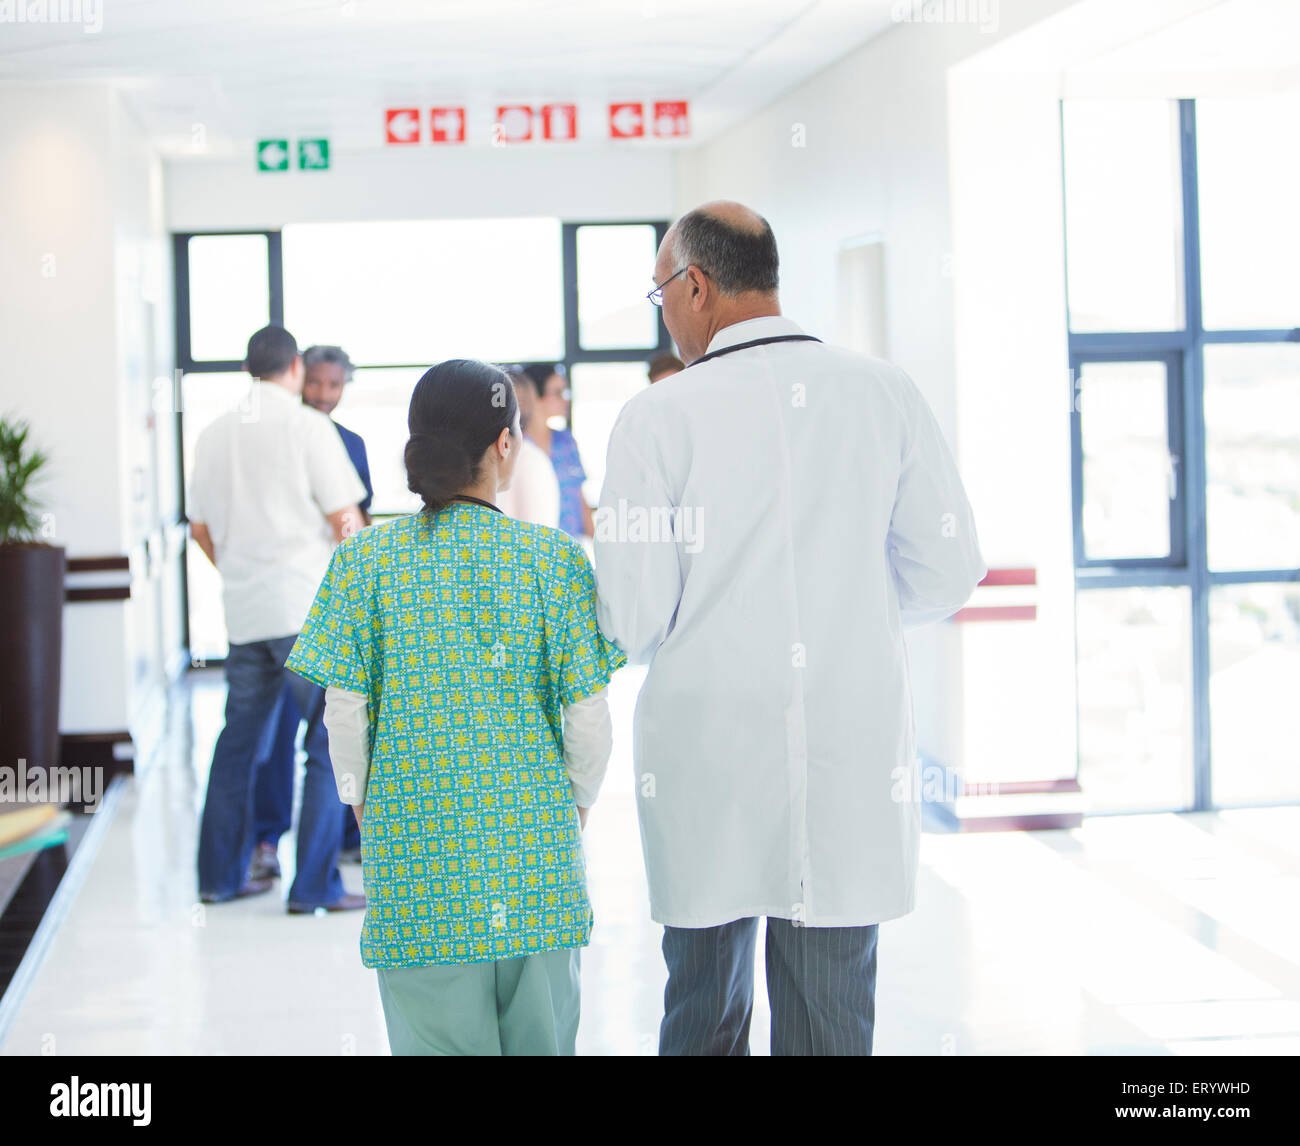 Doctor and nurse walking in hospital corridor Banque D'Images